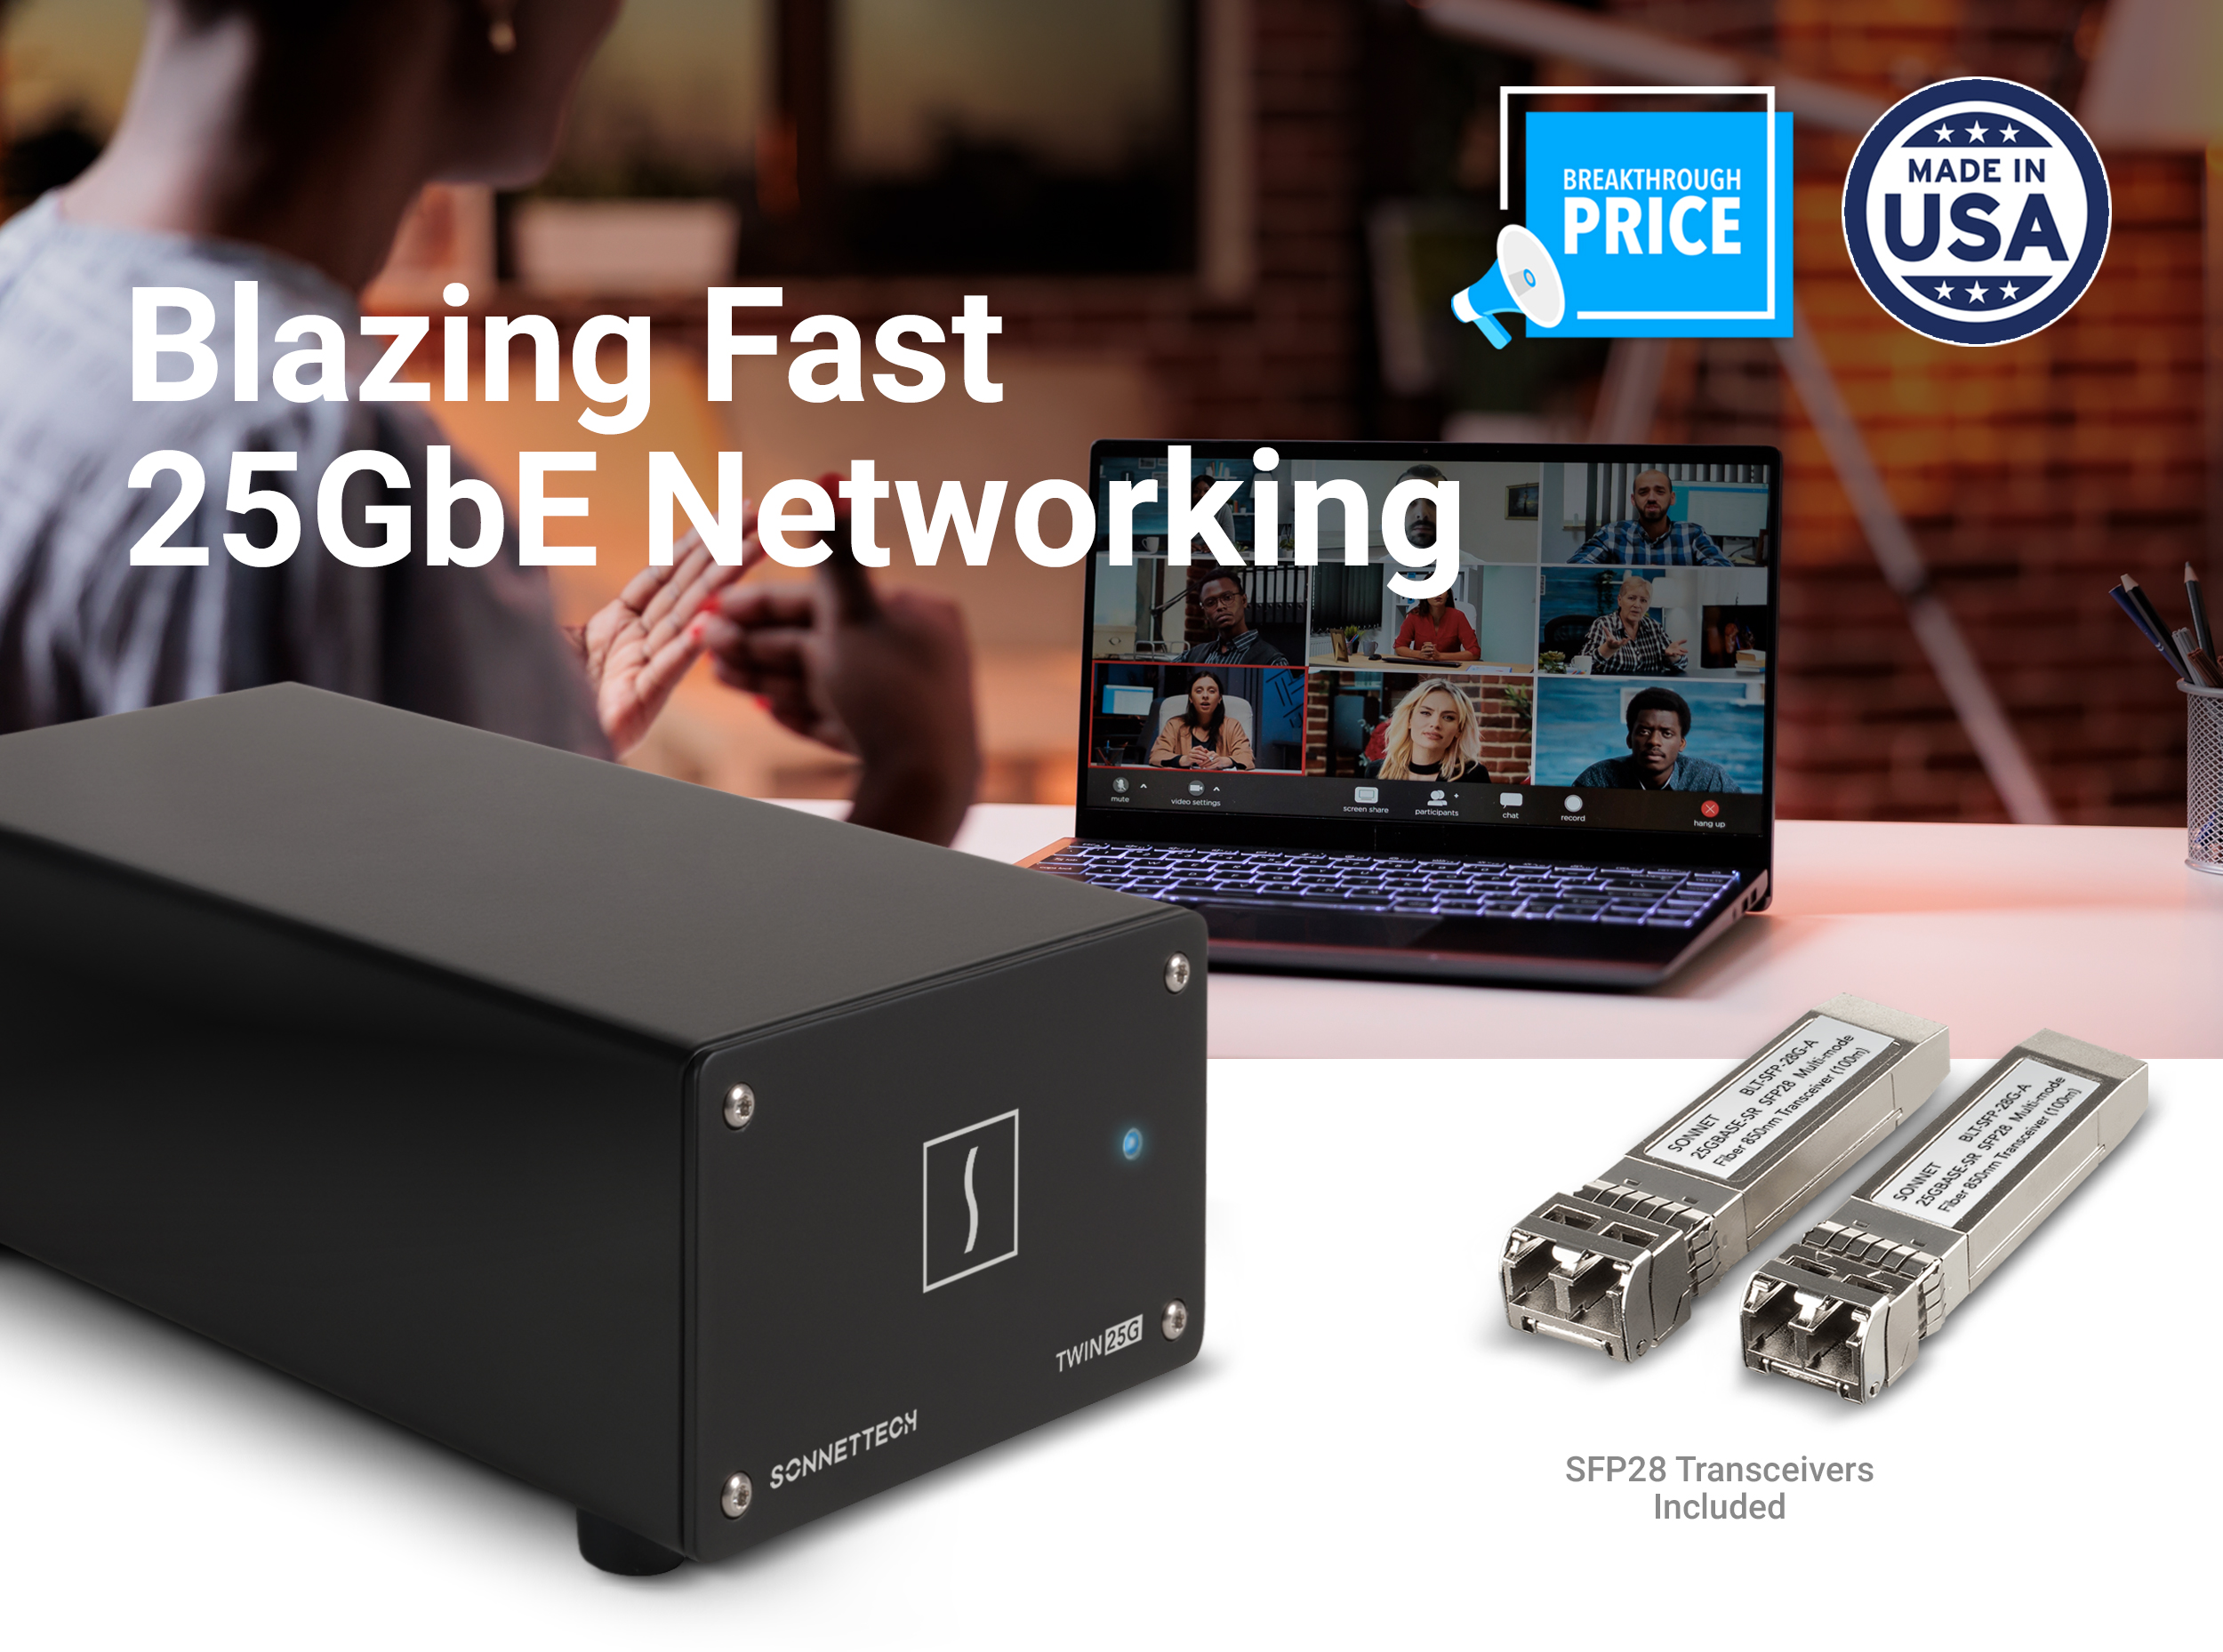 Twin25G Blazing Fast 25GbE Networking with Dual SFP28 Sockets with Two 25GBASE-SR Transceivers